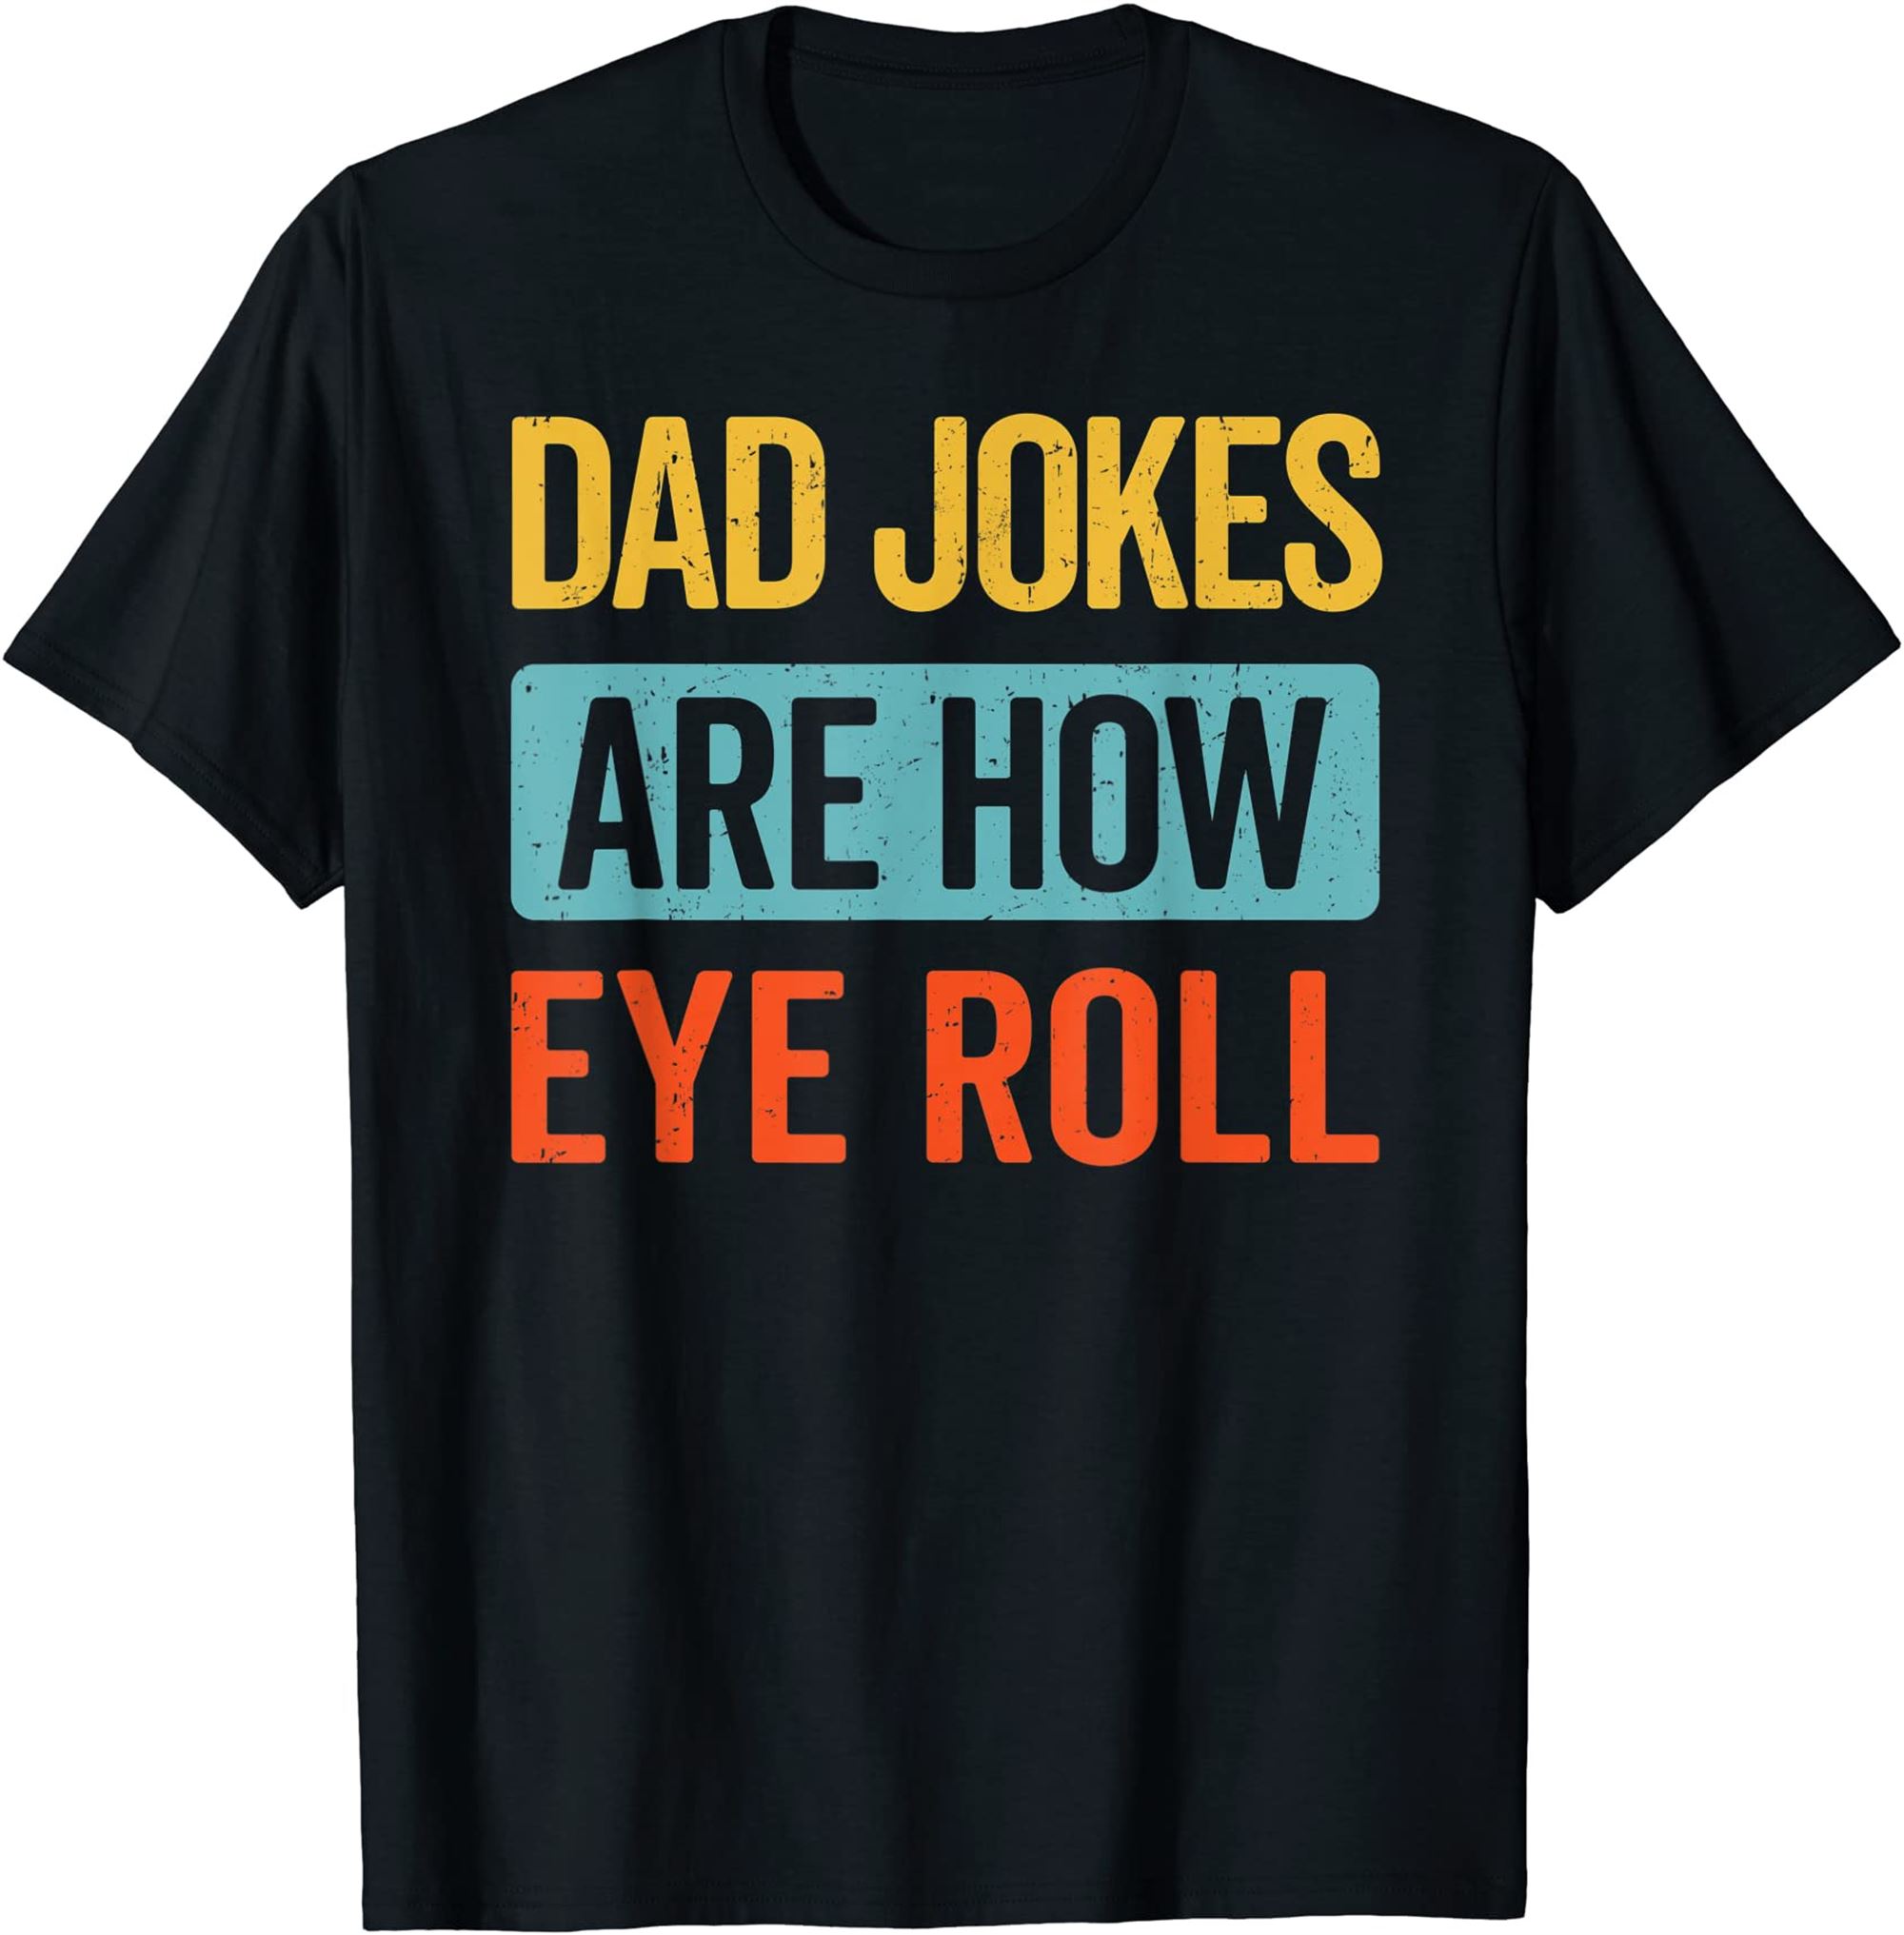 Funny Dad Jokes Are How Eye Roll Retro Dad Joke Fathers Day T-shirt Full Size Up To 5xl